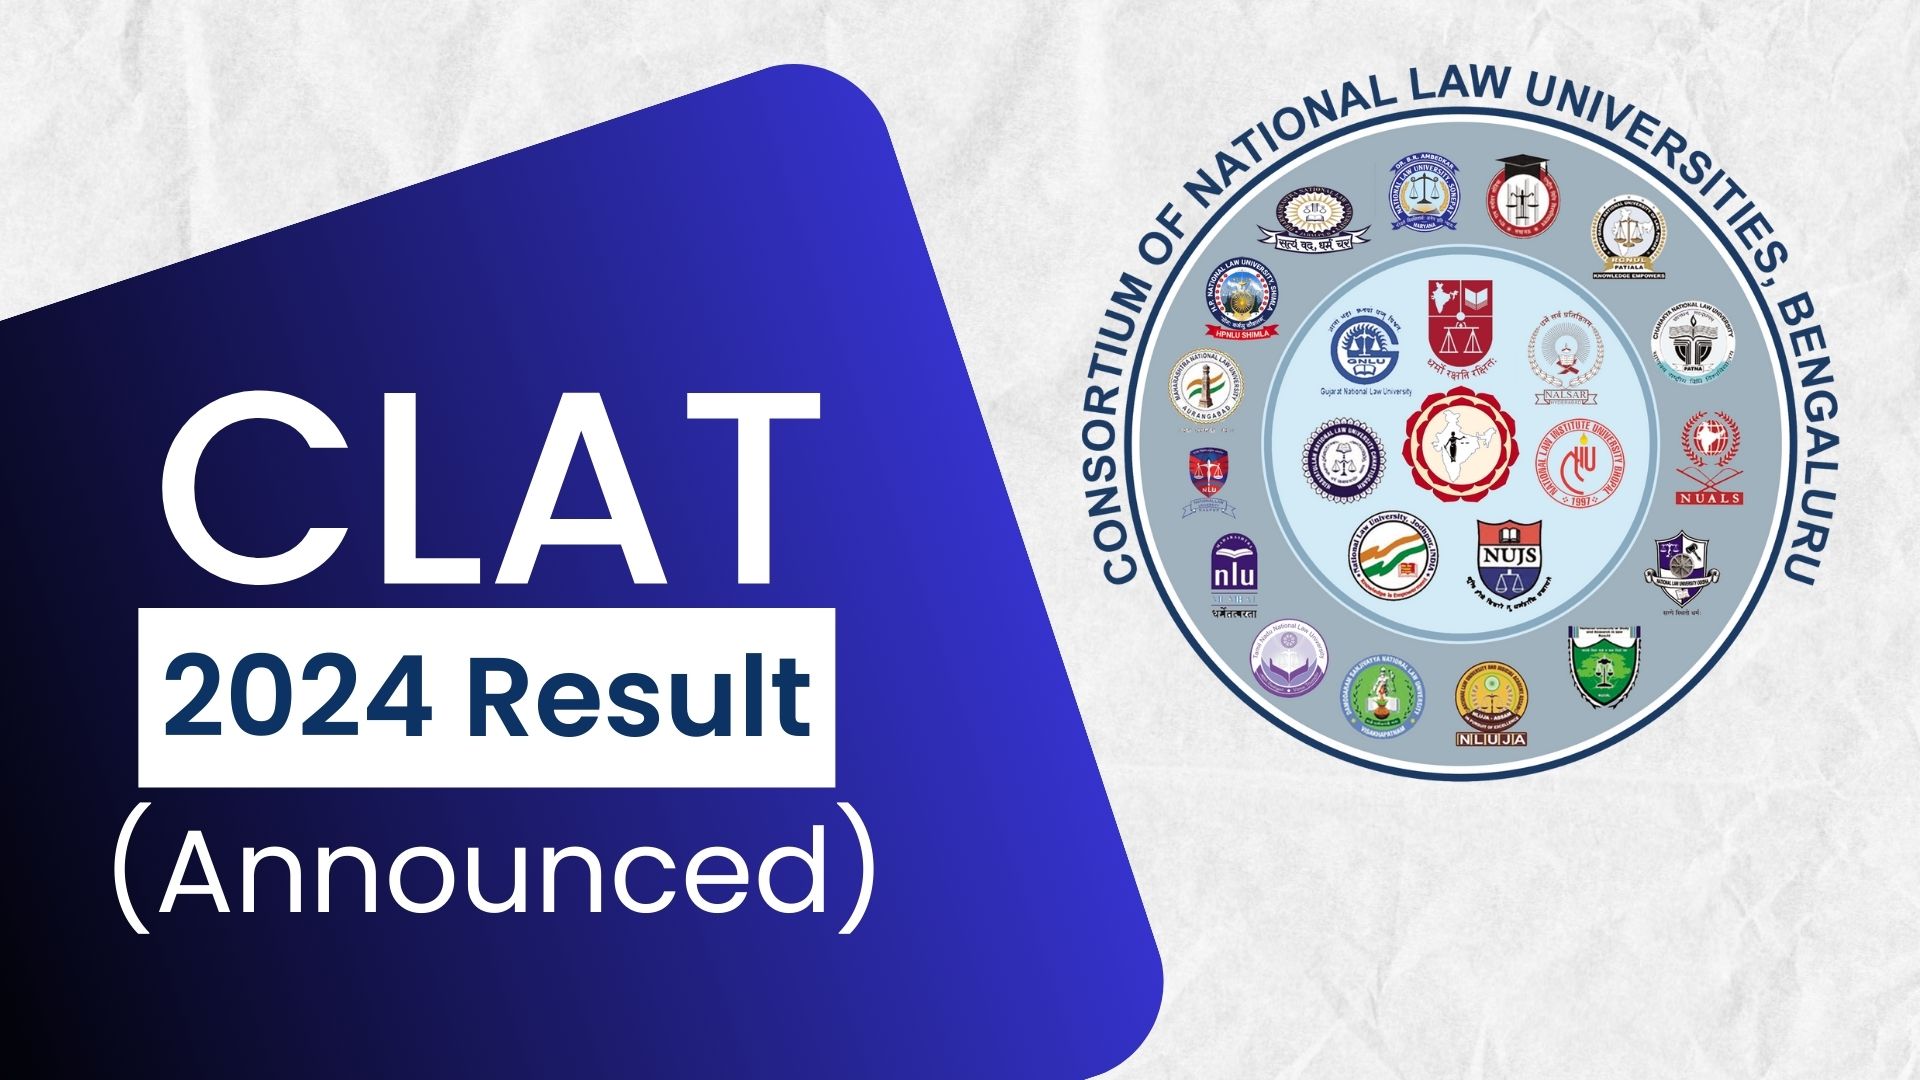 CLAT 2024 Result Out Score Cards Available At Consortiumofnlus.ac.in